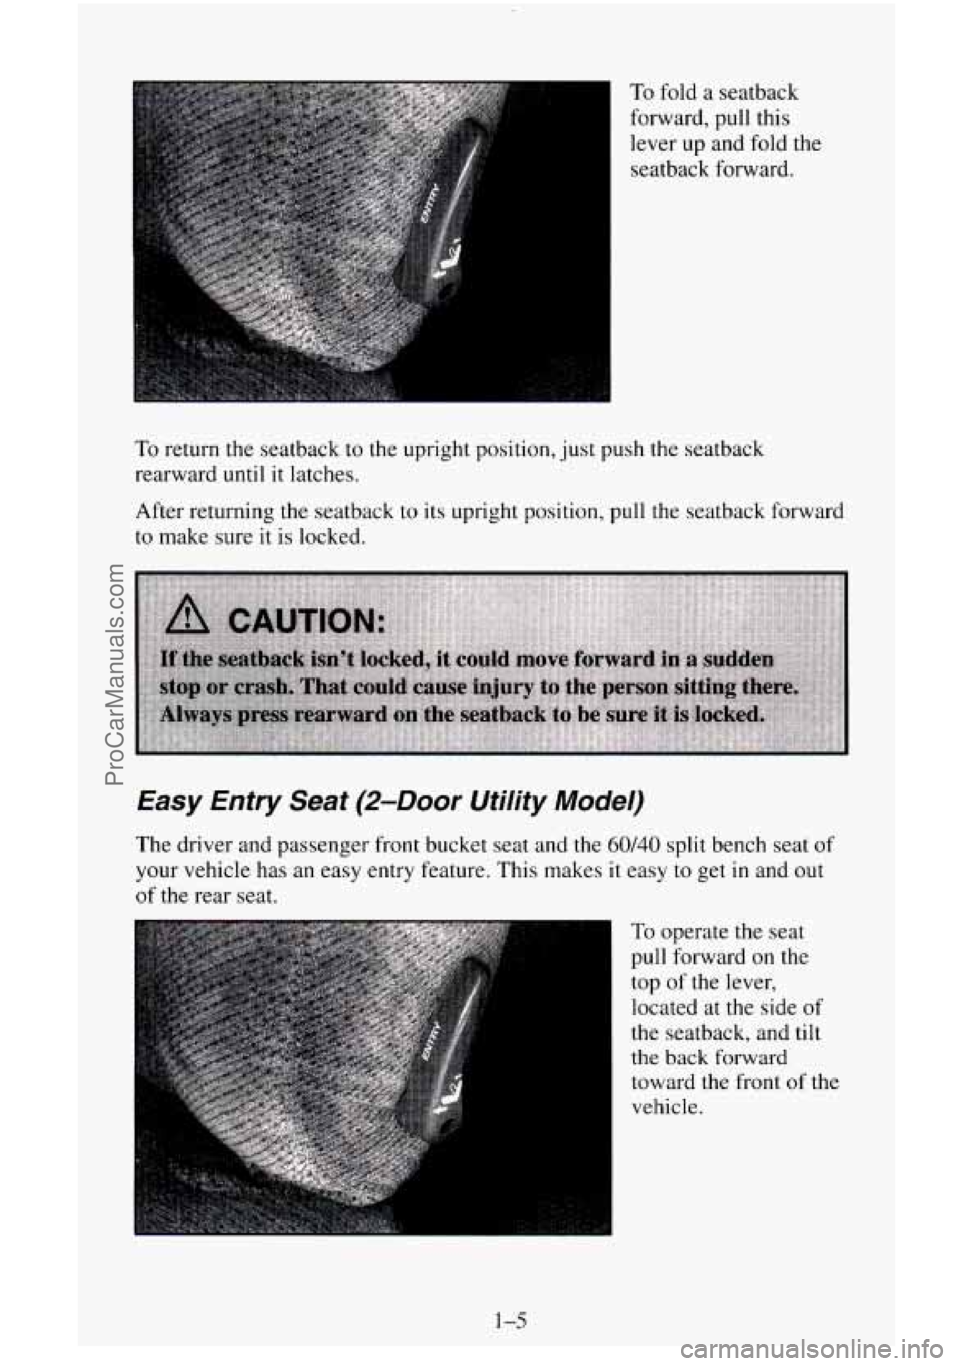 CHEVROLET SUBURBAN 1996 User Guide I To fold  a  seatback 
, forward, pull this 
~ lever  up  and fold the 
i seatback  forward. 
~ 
To return the seatback  to  the upright position,  just  push the seatback 
rearward 
until it latches